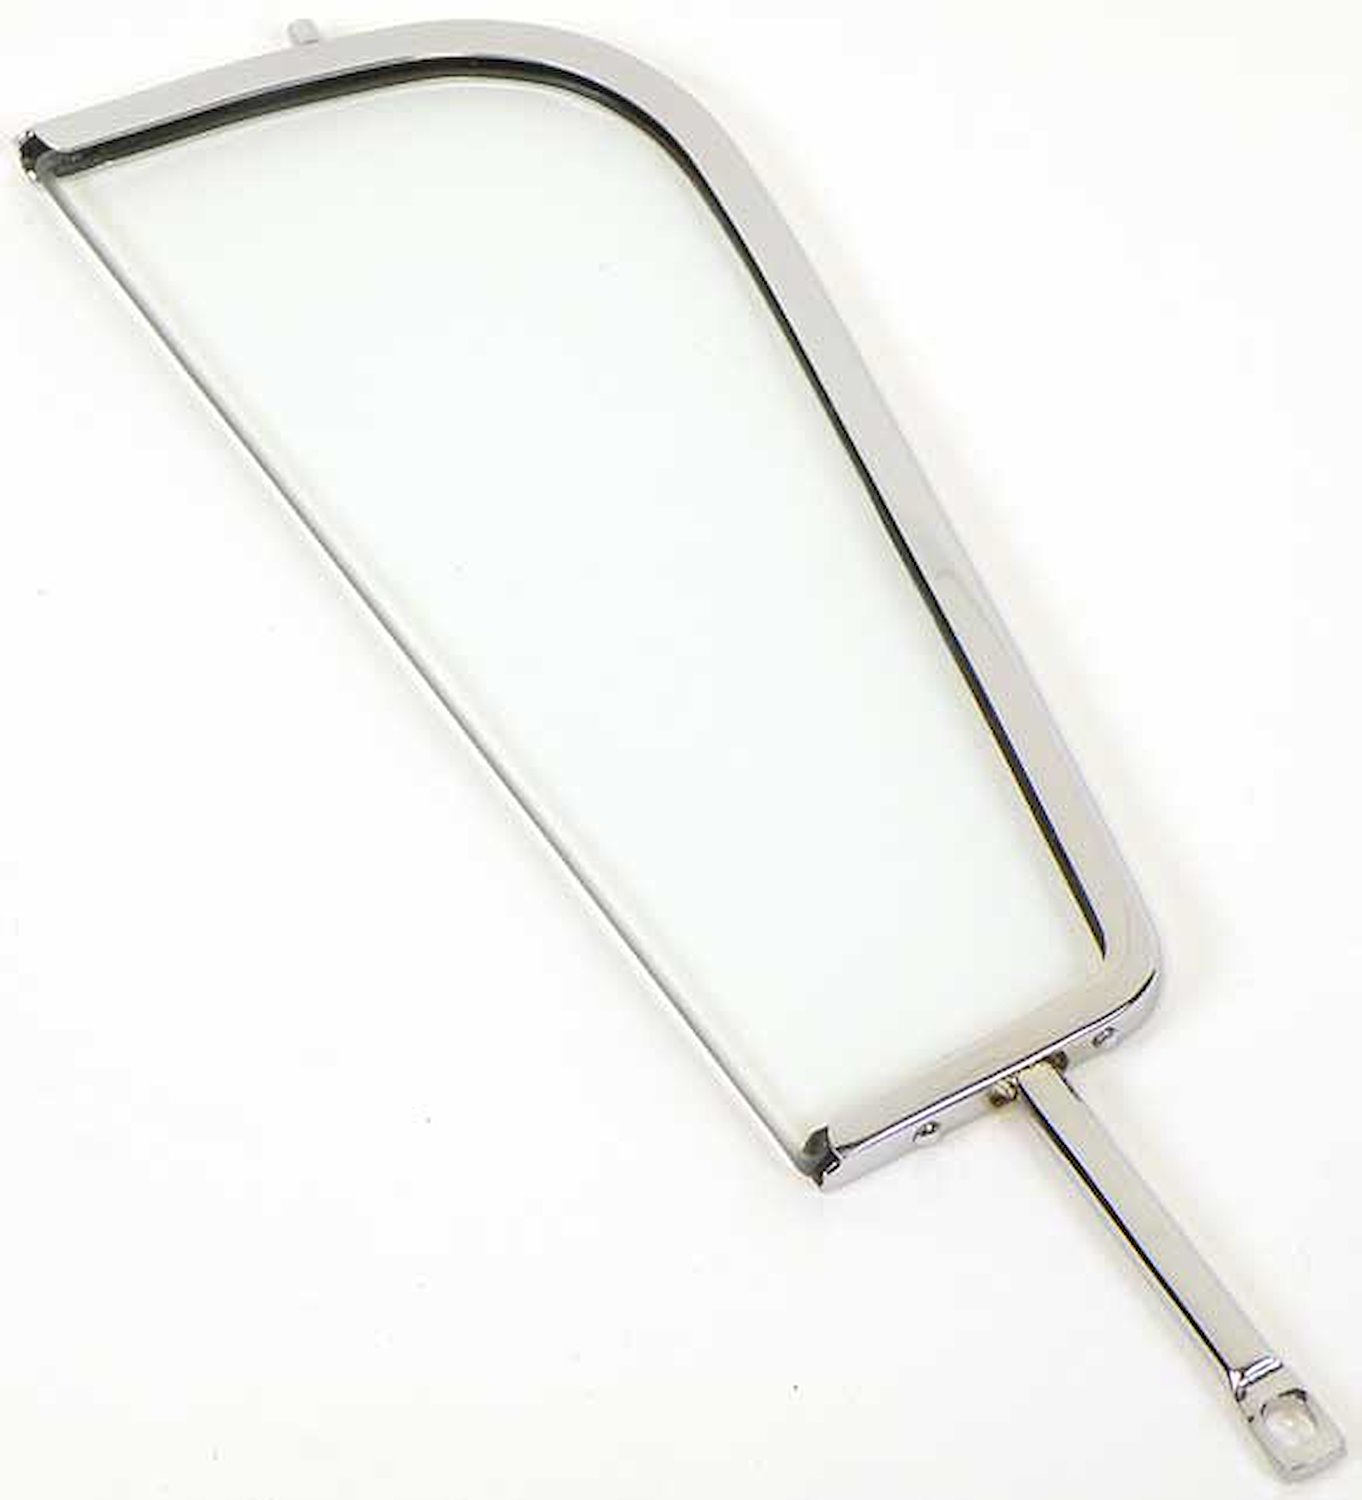 A1639 Vent Assembly 1959-60 Impala/Bel Air Hardtop/Convertible With Clear Glass; LH